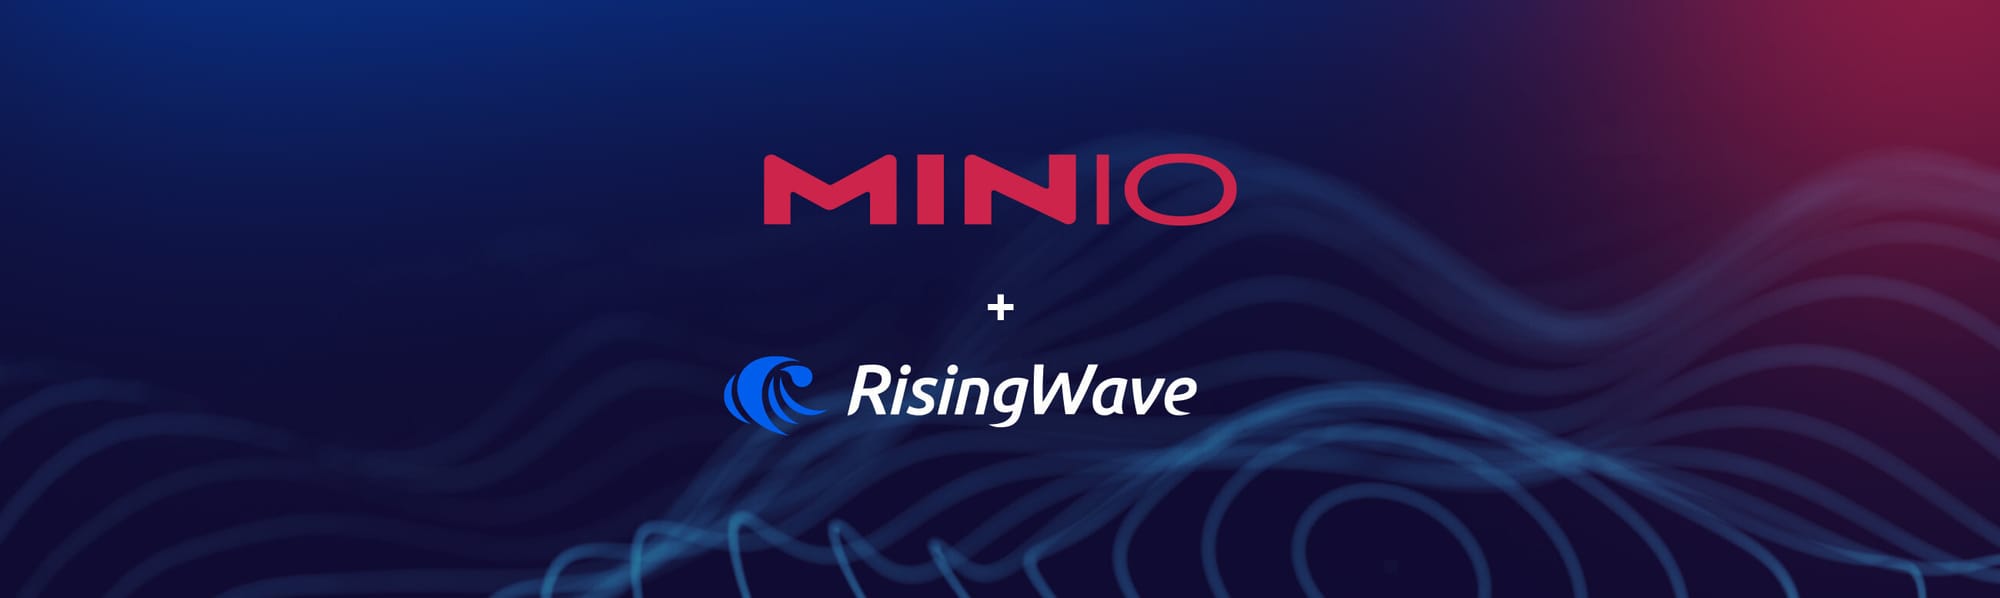 Optimizing Your Data Lakehouse for AI: A Closer Look at RisingWave with MinIO